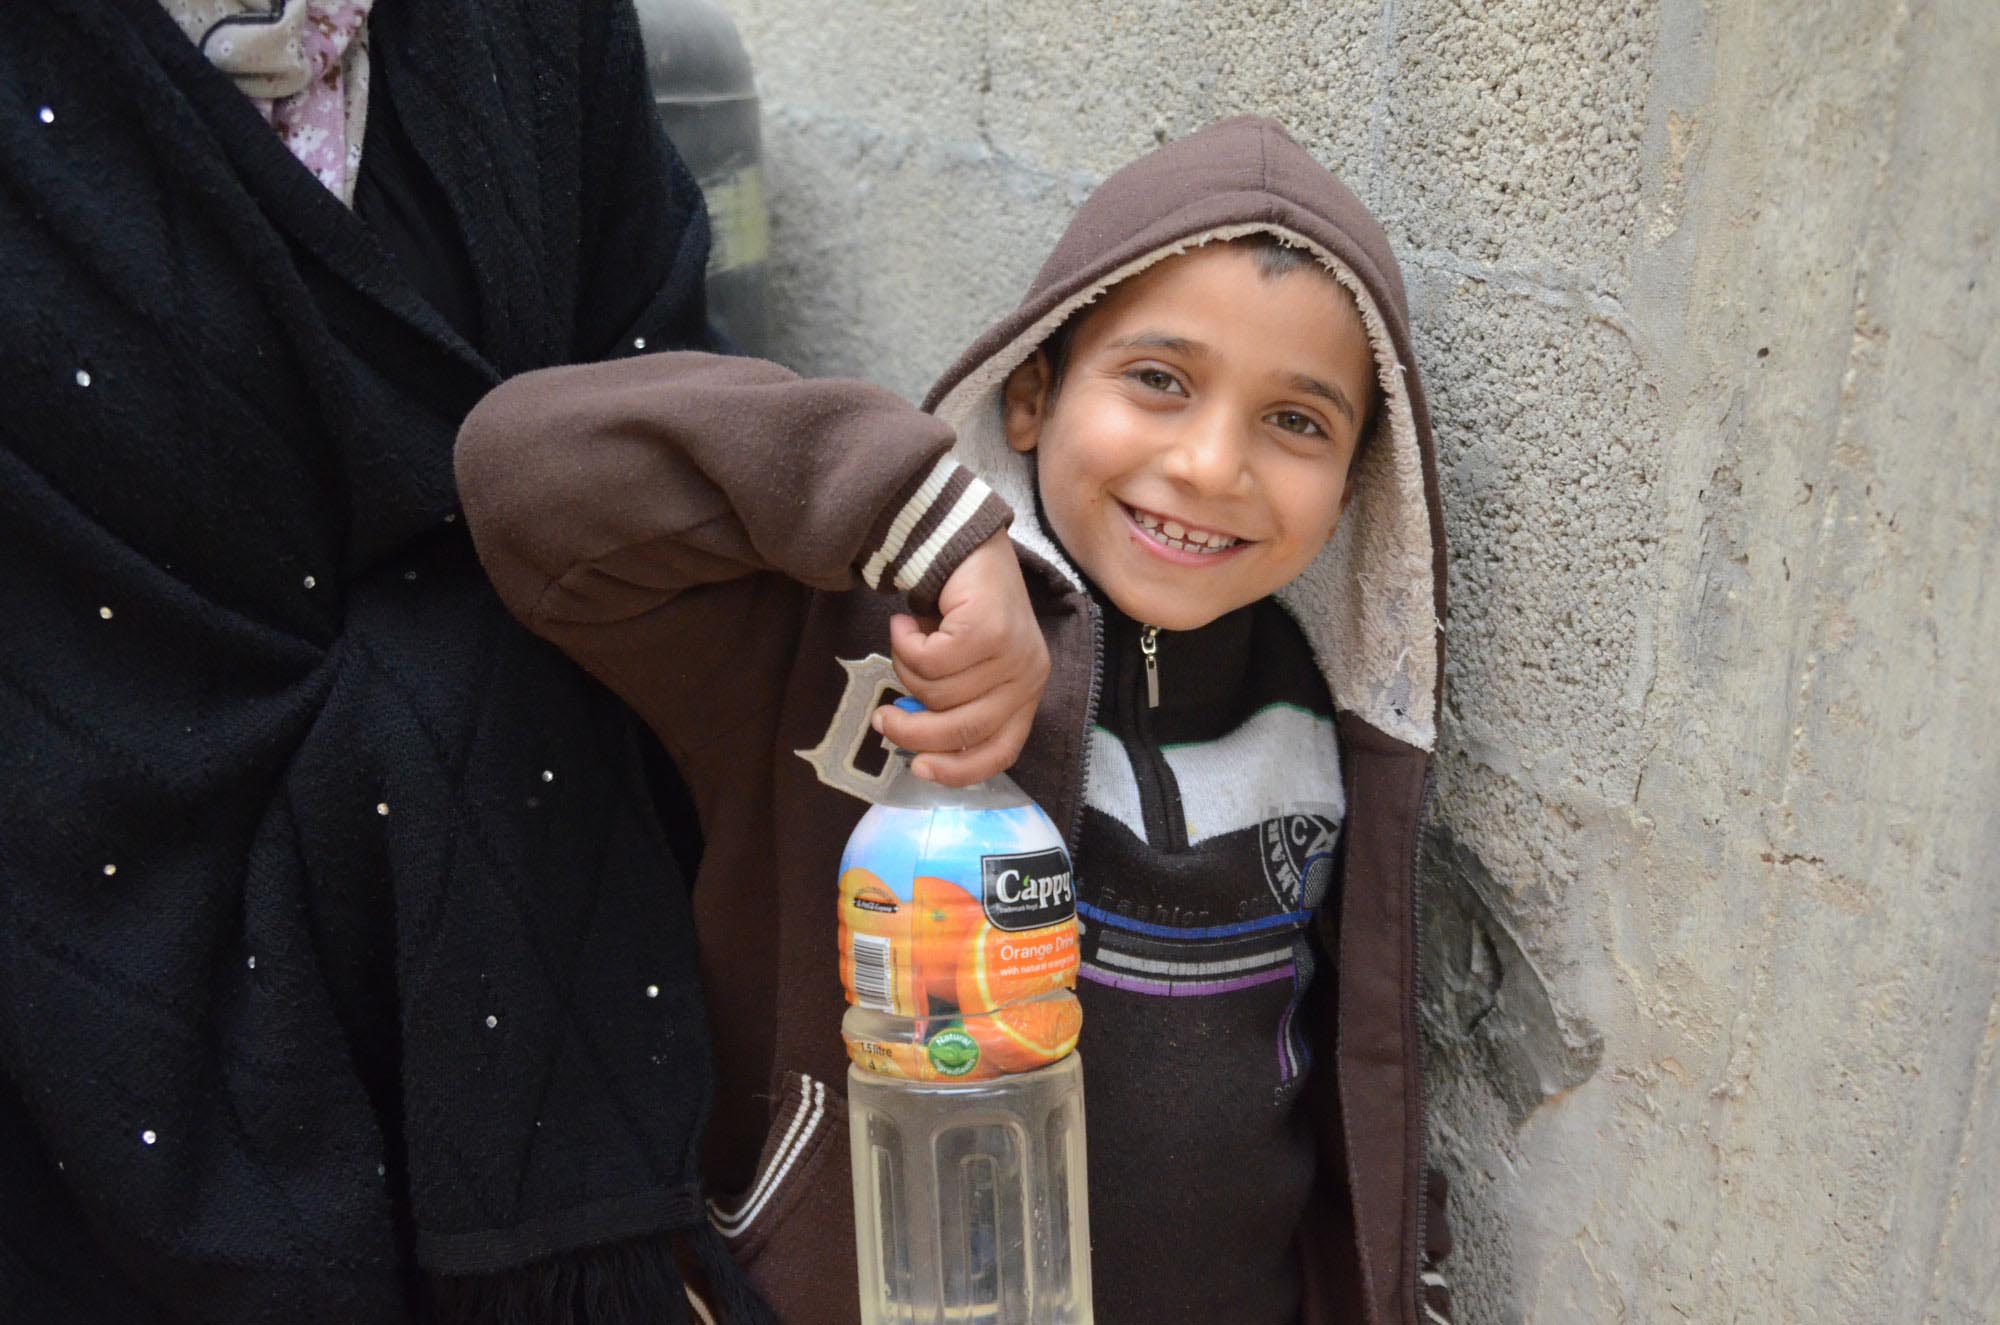 We're restoring water for Gaza families, like Mohanad's and Fatima's.